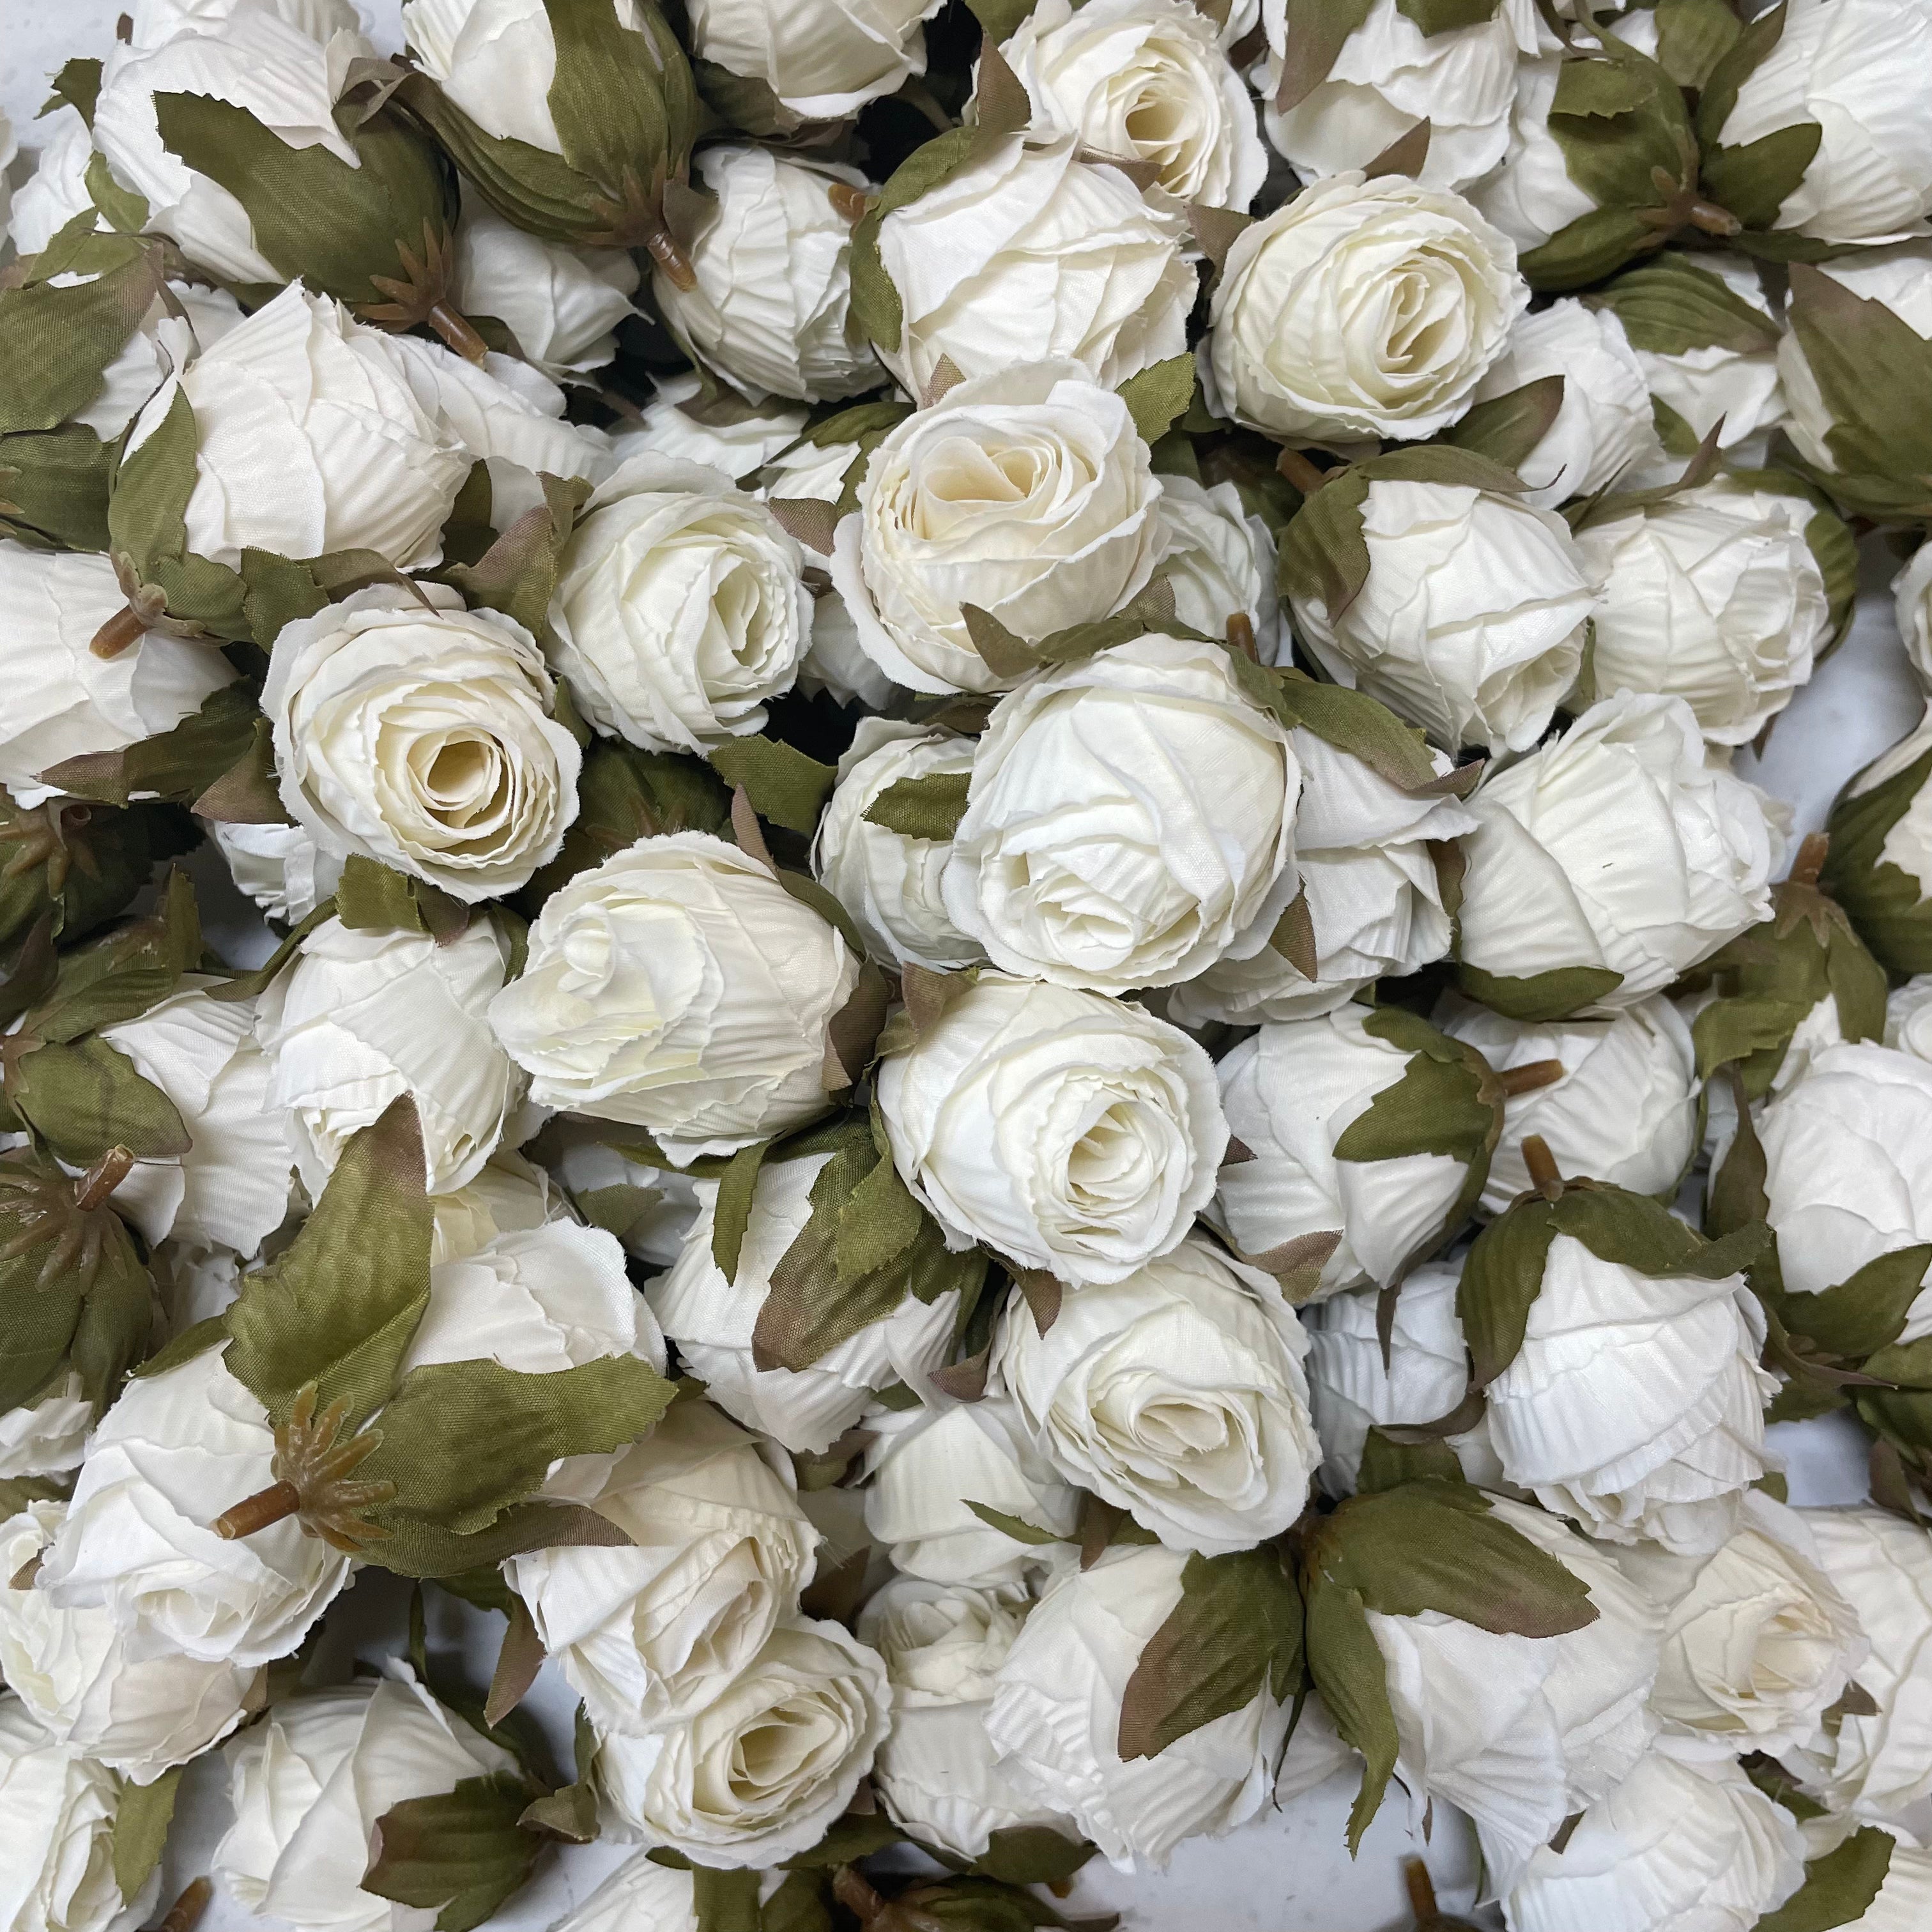 Artificial Silk Flower Heads - Milky White Rose Bud Style 112 - 5 Pack